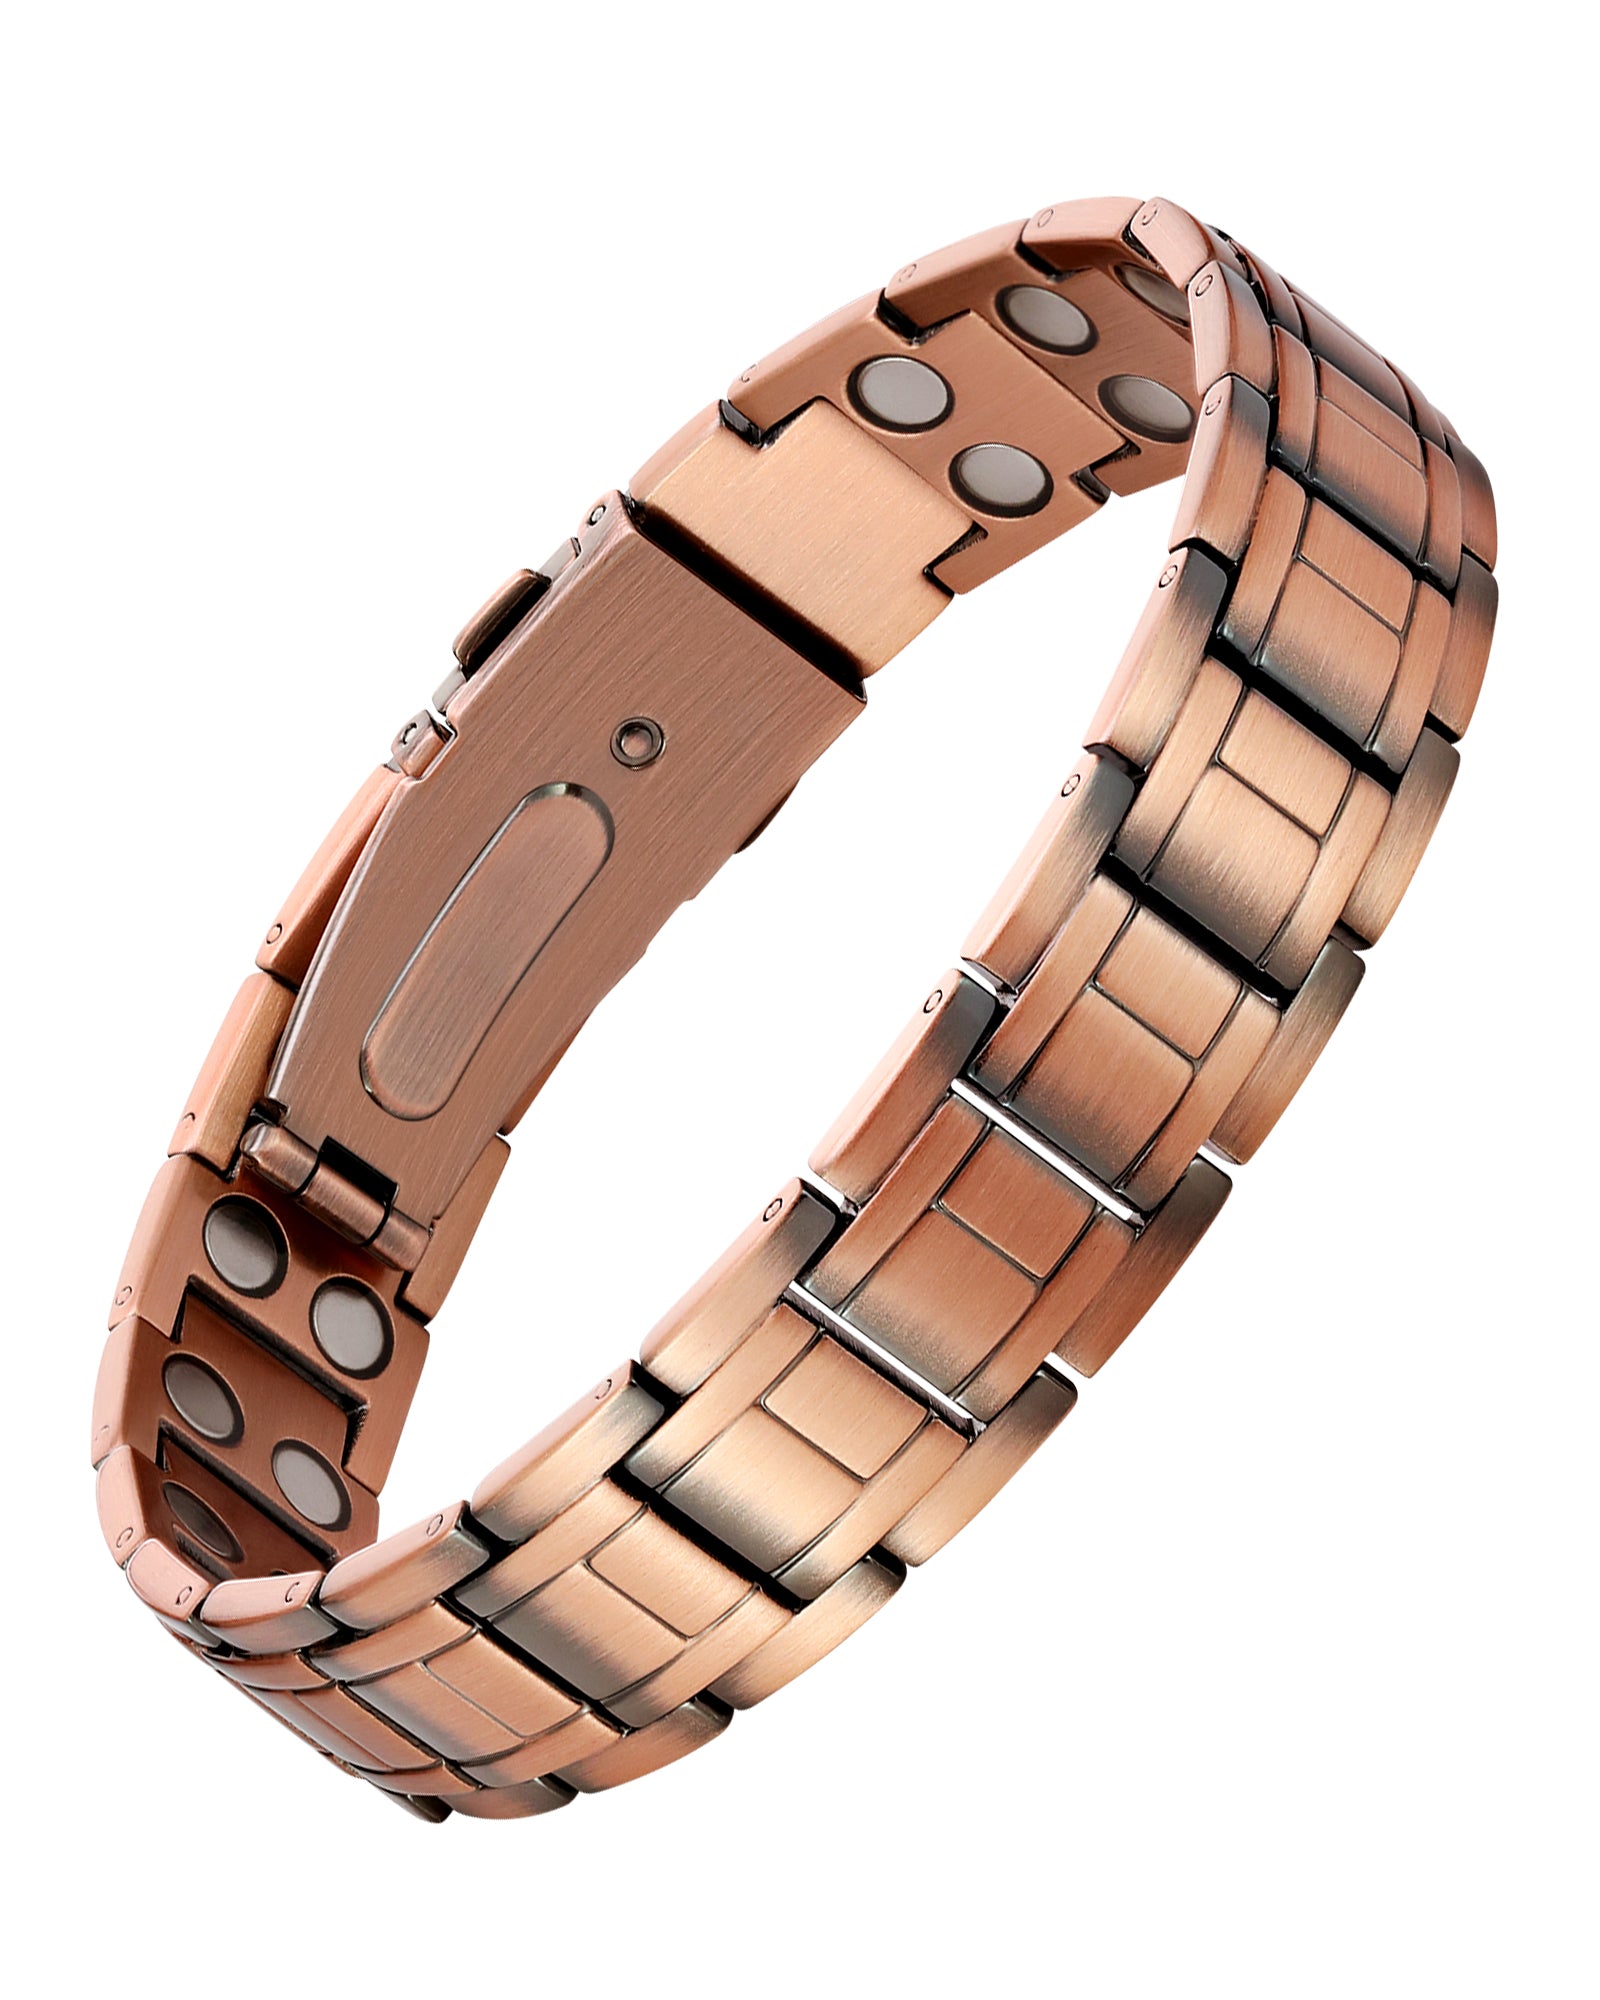 Feraco 99.99% Pure Copper Bracelet for Men, Ultra Strength Magnetic Bracelet with Powerful Neodymium Magnets & Pro Folding Clasp, Adjustable